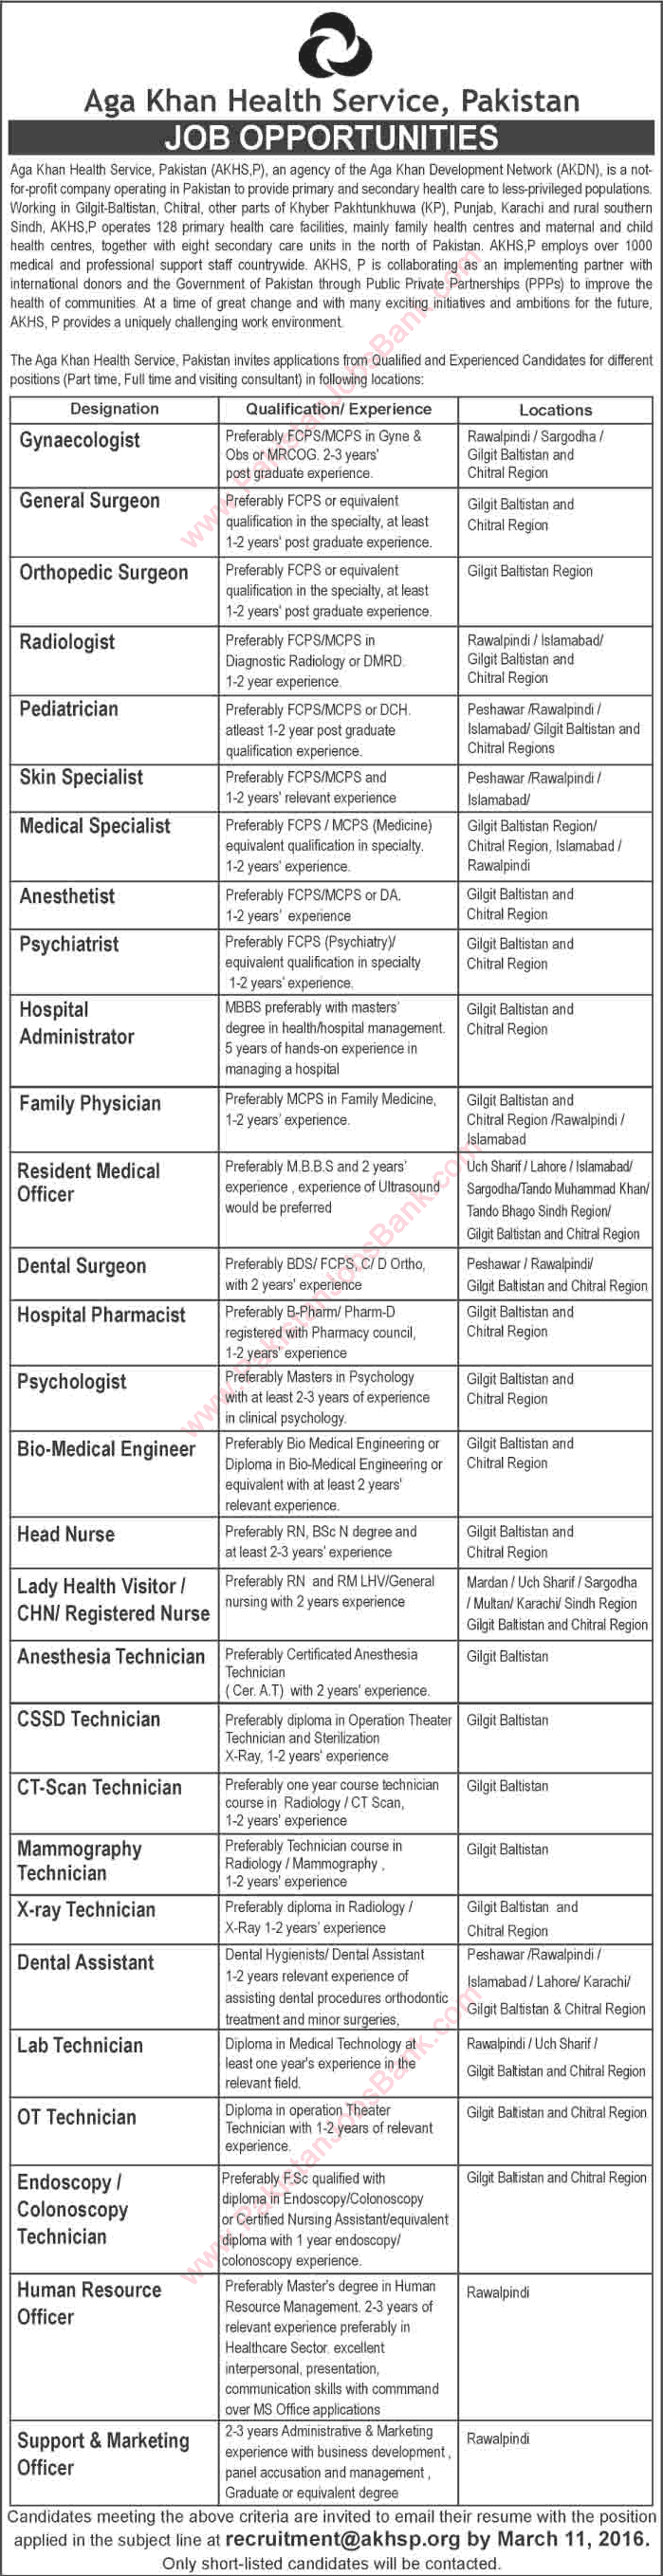 Aga Khan Health Services Pakistan Jobs 2016 February / March Specialist Doctors, Medical Technicians & Others Latest